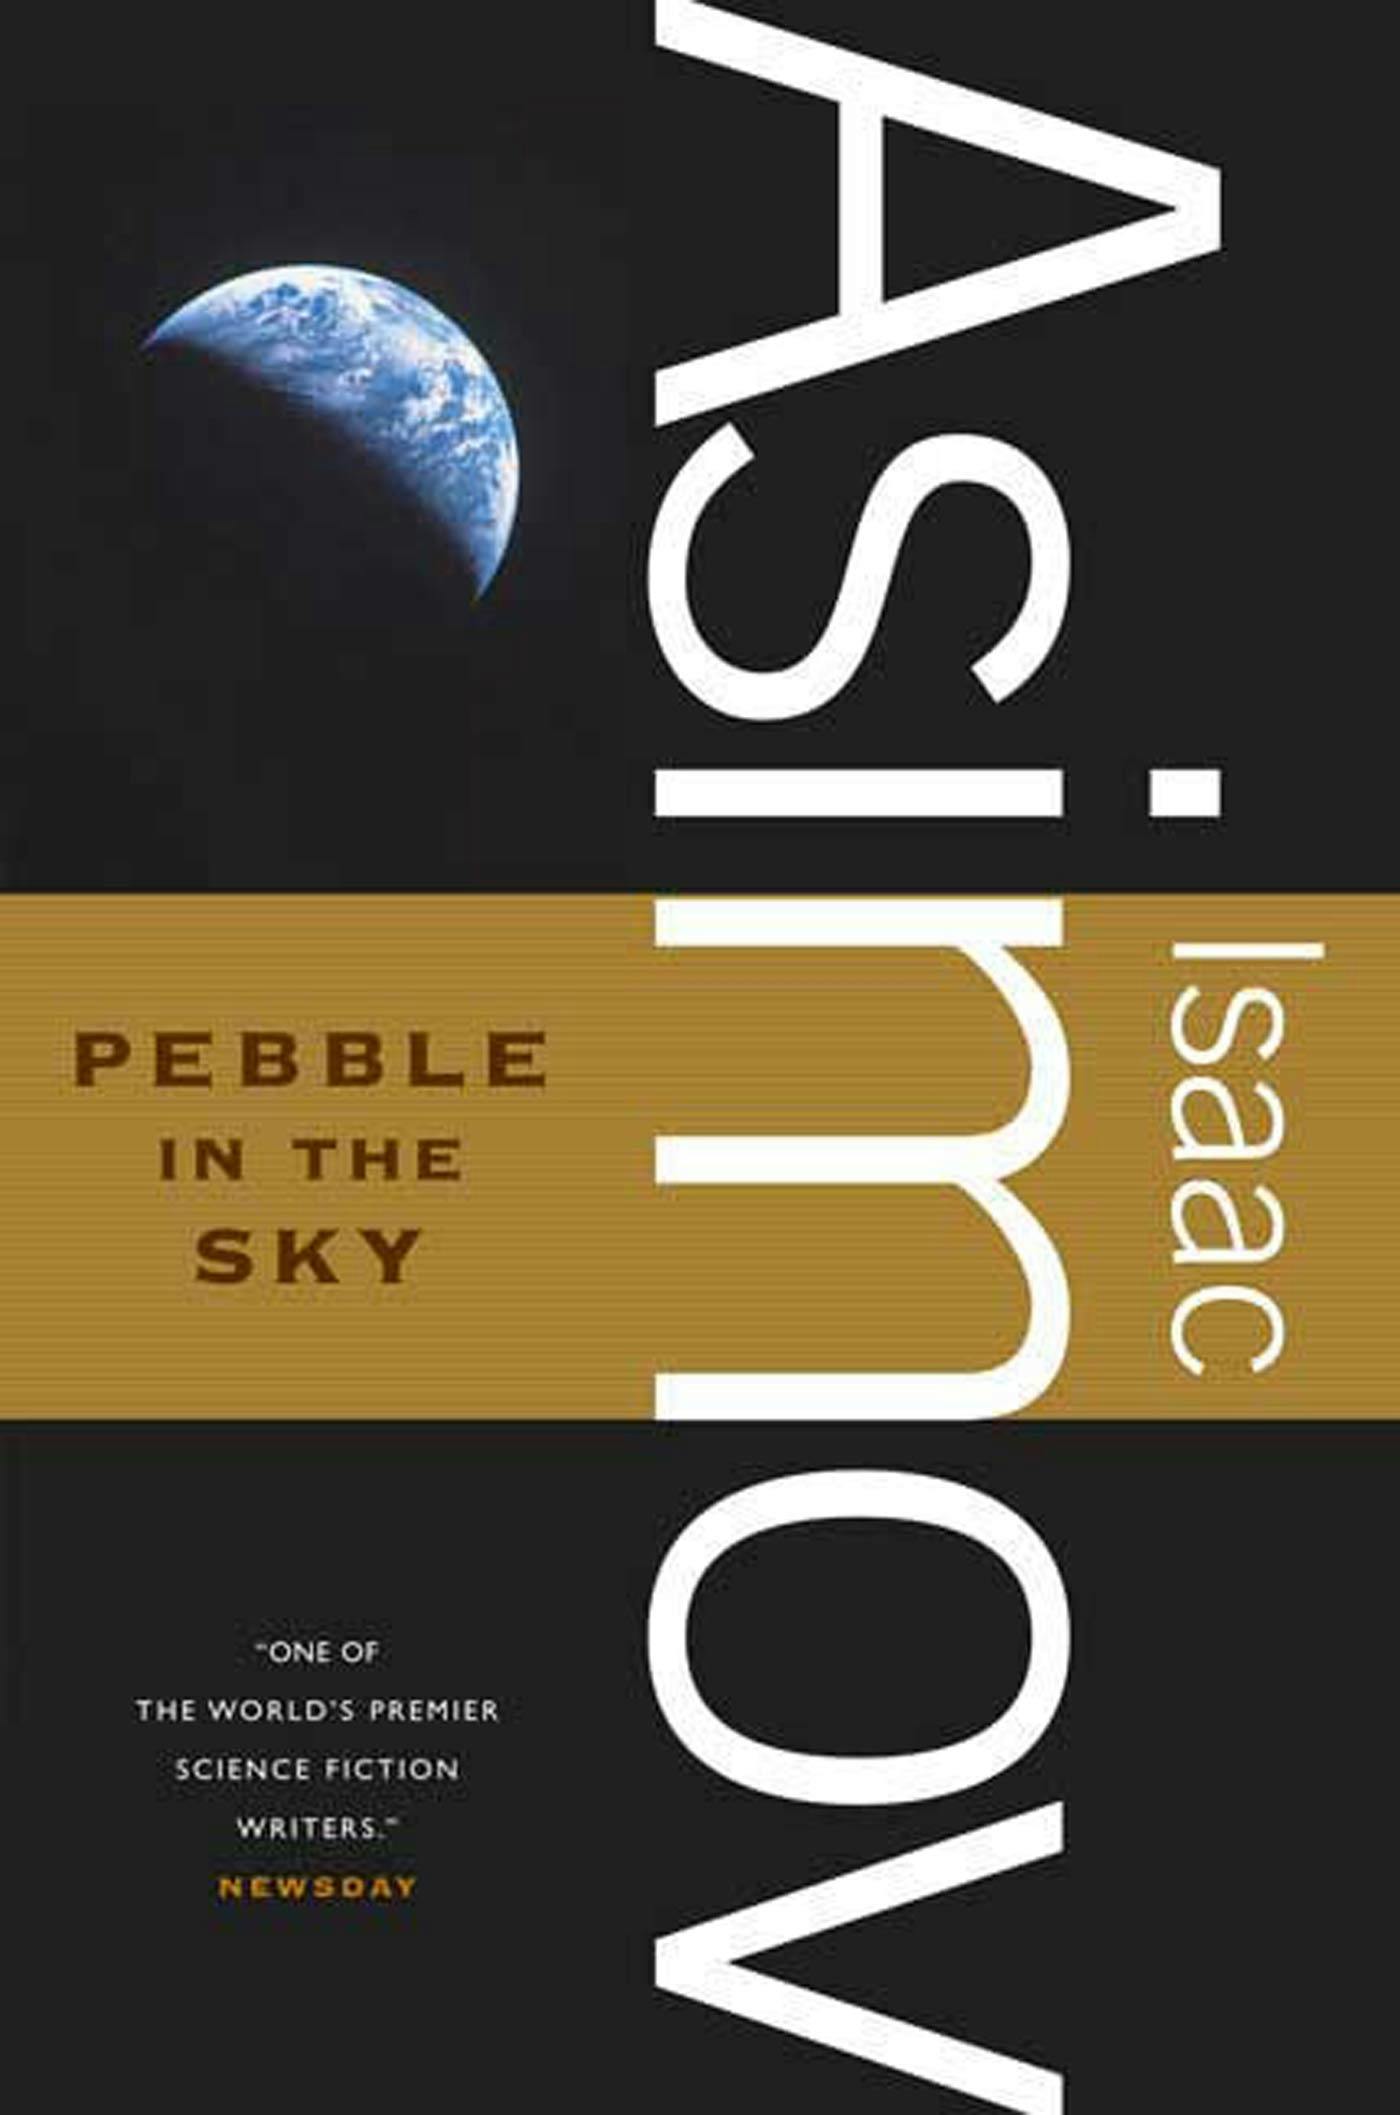 Cover for the book titled as: Pebble in the Sky